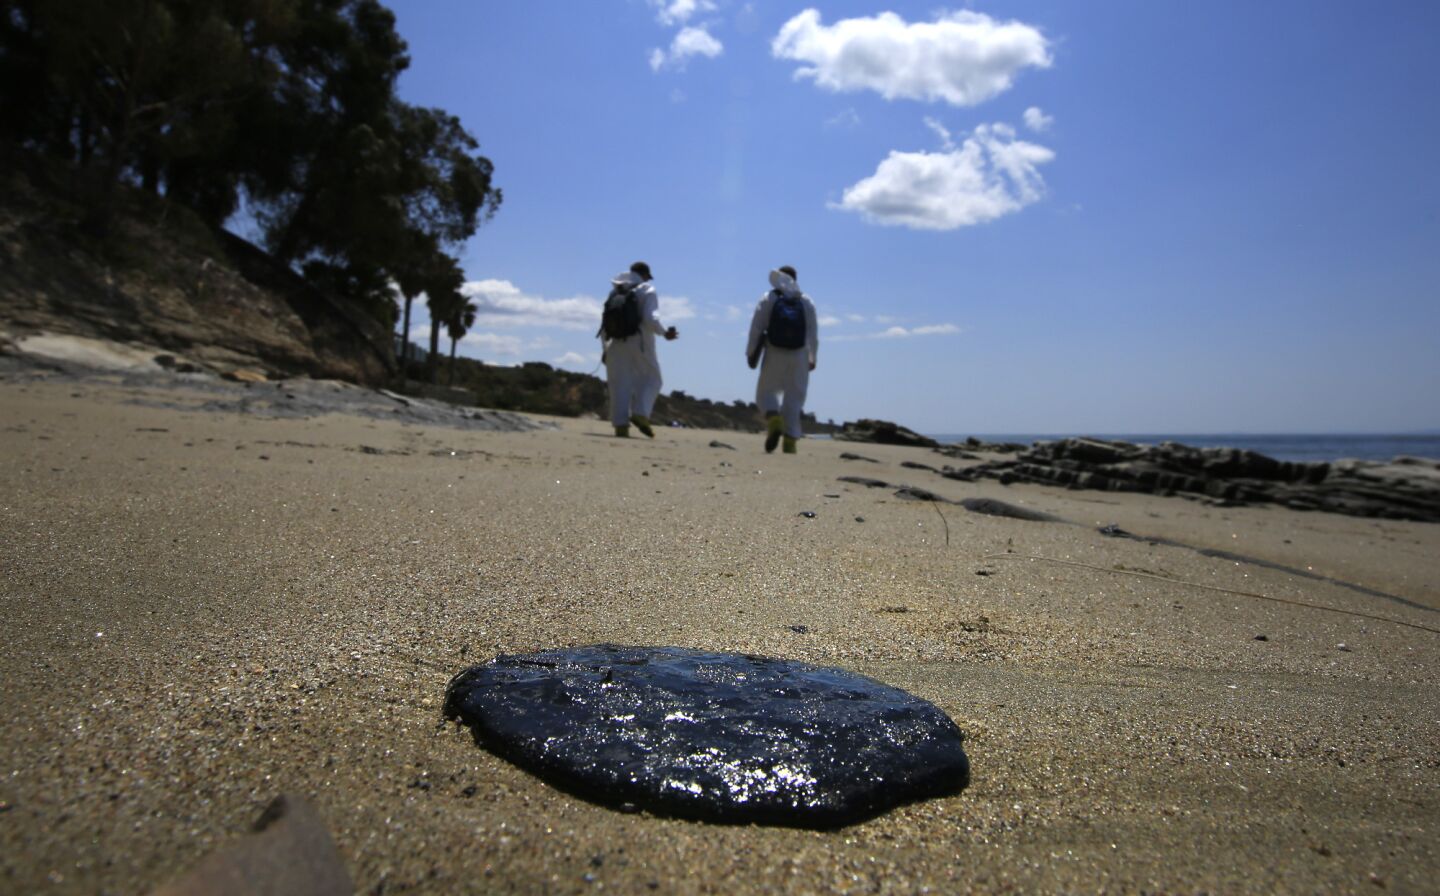 A large glob of oil on the beach at Arroyo Quemado in the aftermath of the oil spill on the Gaviota coast.